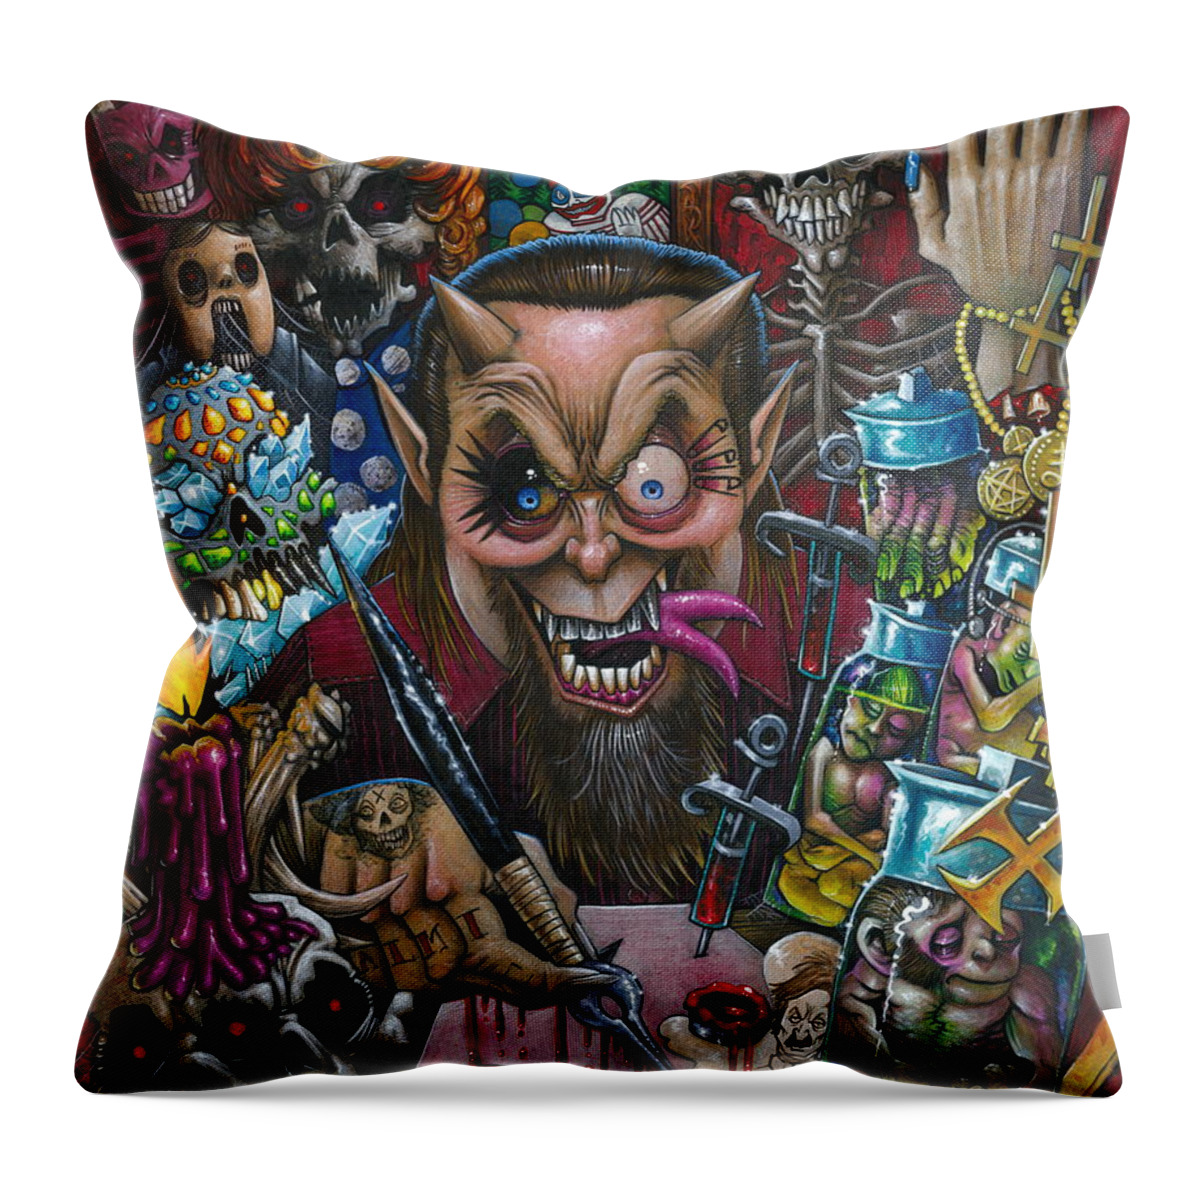 Ryanalmighty Throw Pillow featuring the painting PORTRAIT OF RYAN ALMIGHTY by RYAN JONES by Ryan Jones